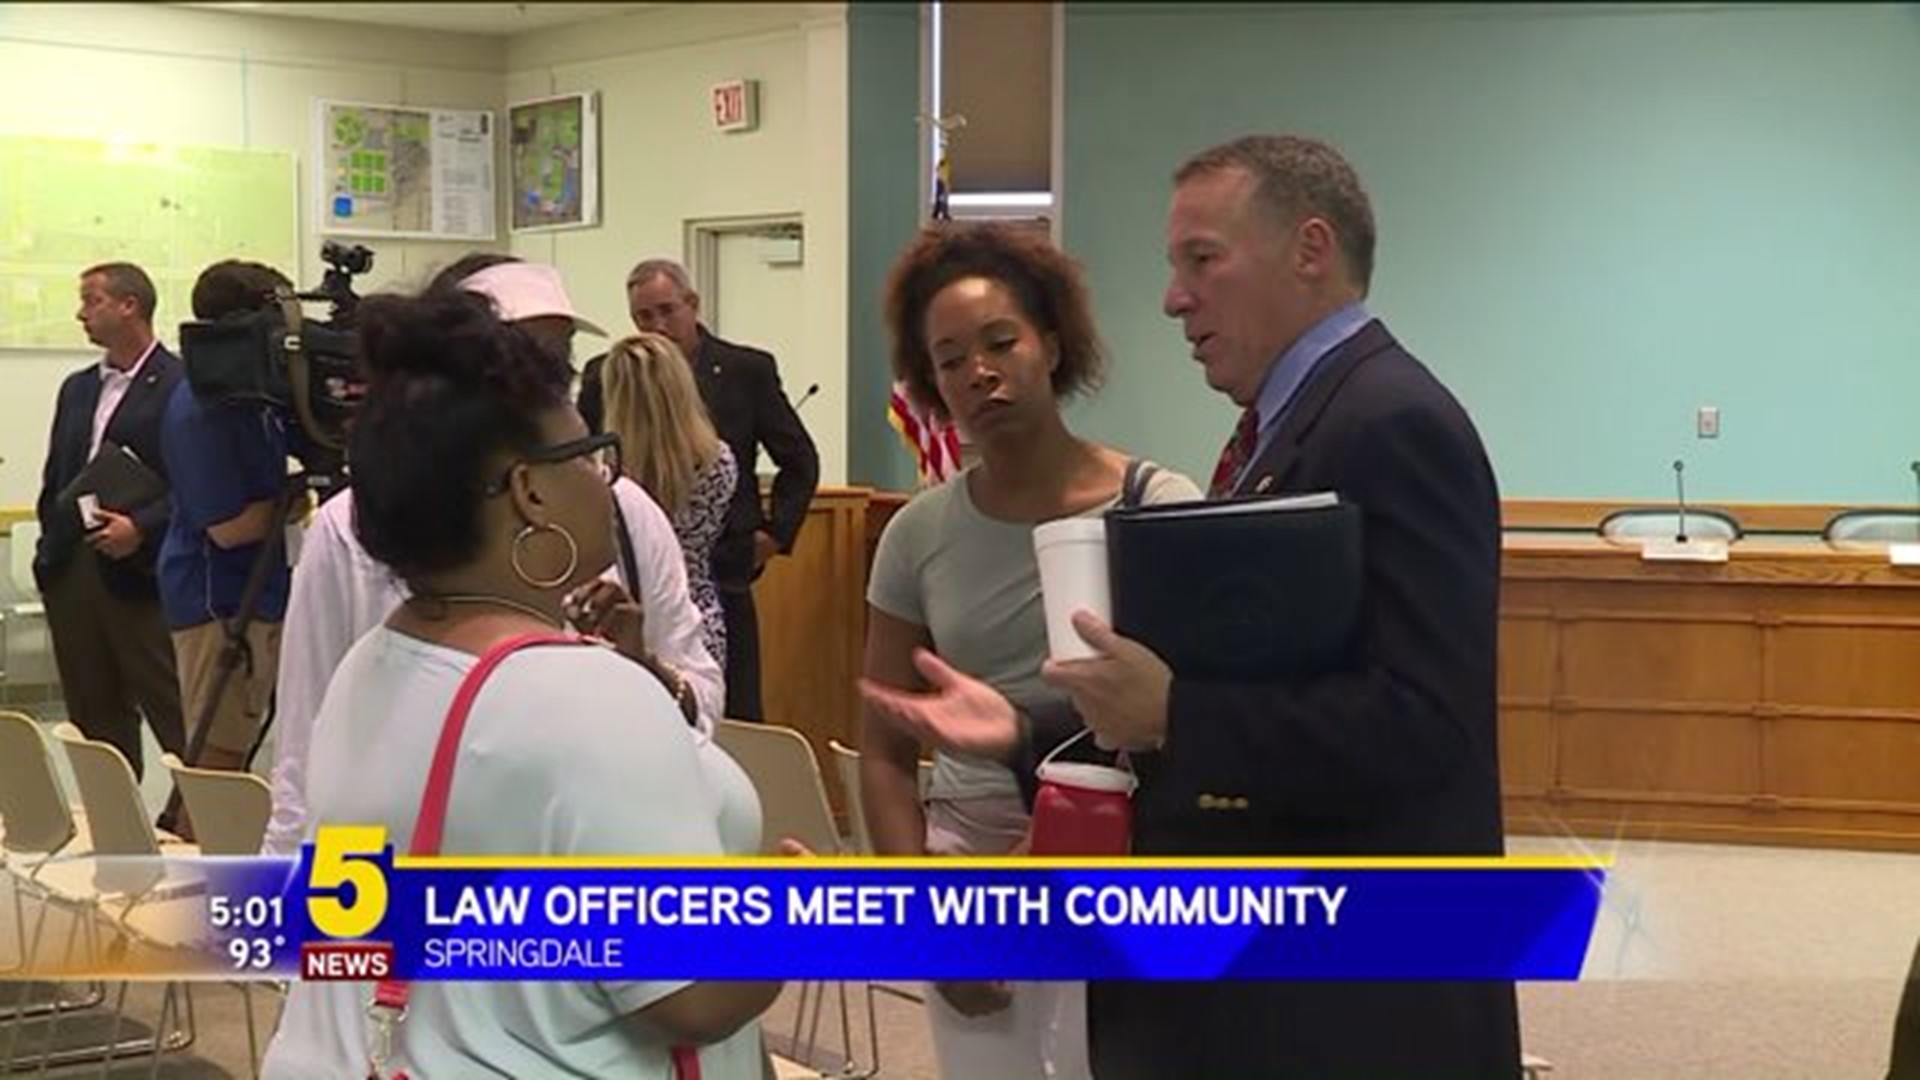 LAW ENFORCEMENT OFFICERS HOLD OPEN HOUSE